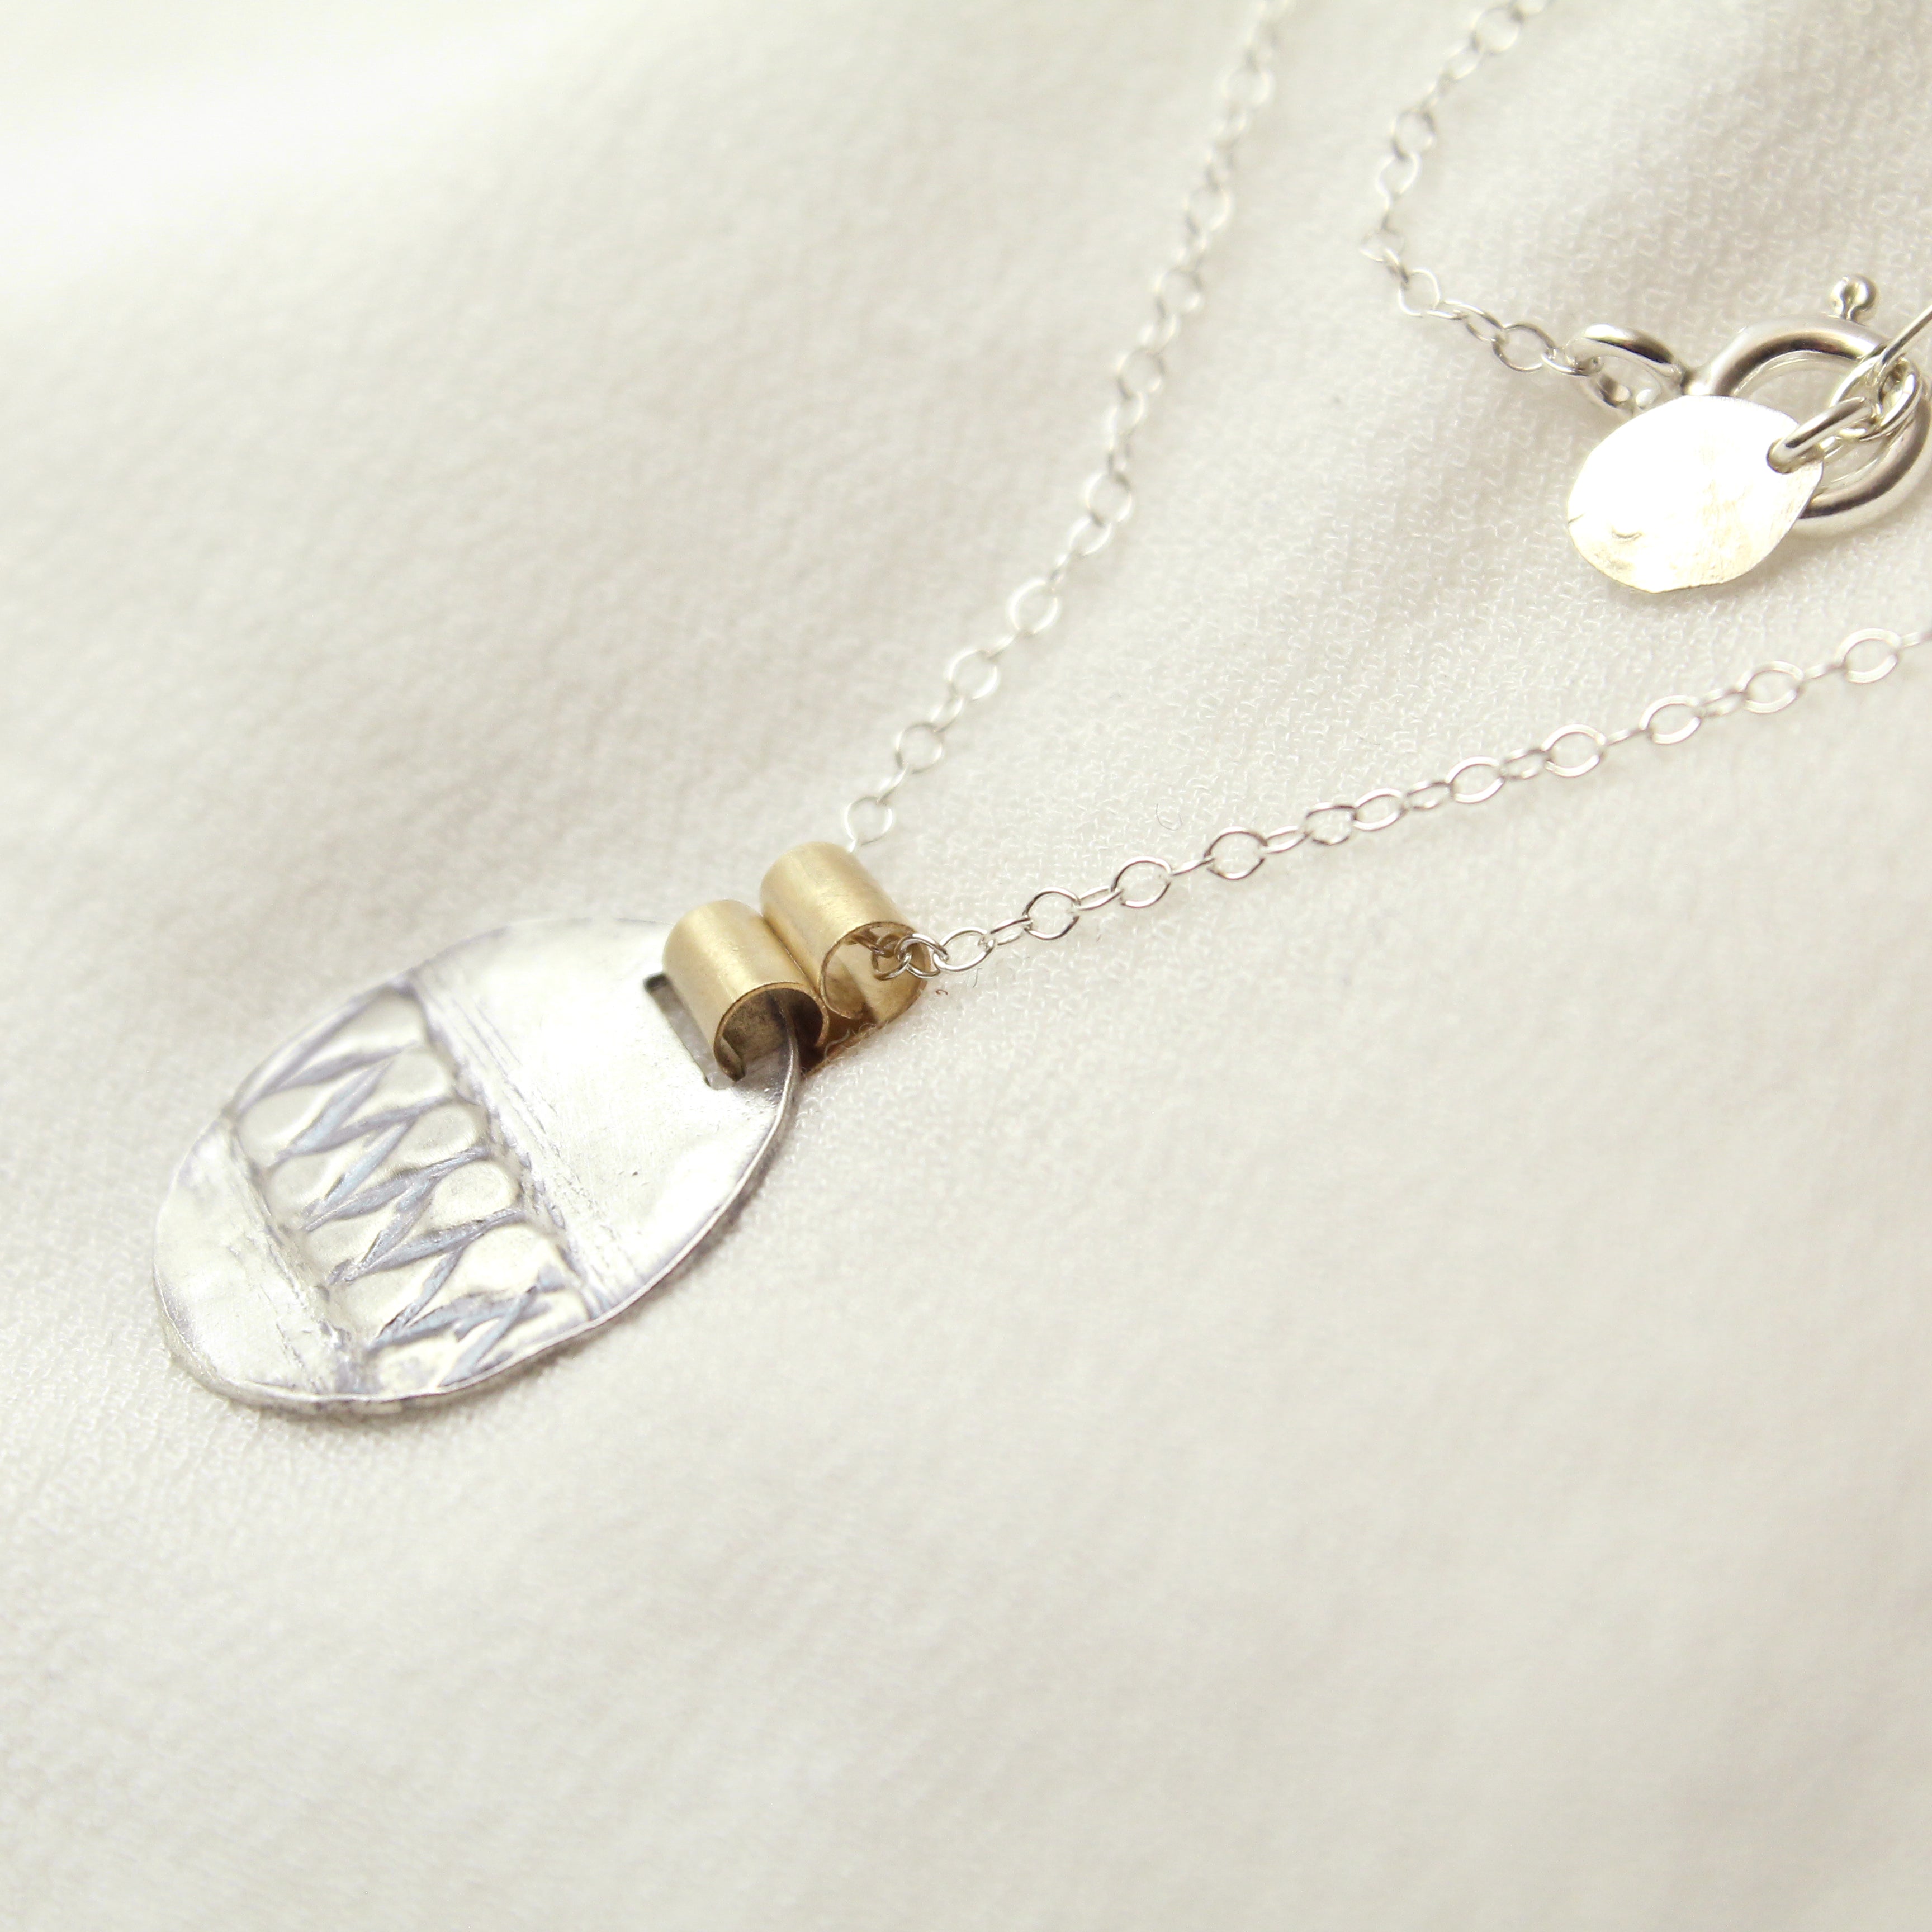 Silver & 14K Gold Filled Circular Pendent Necklace